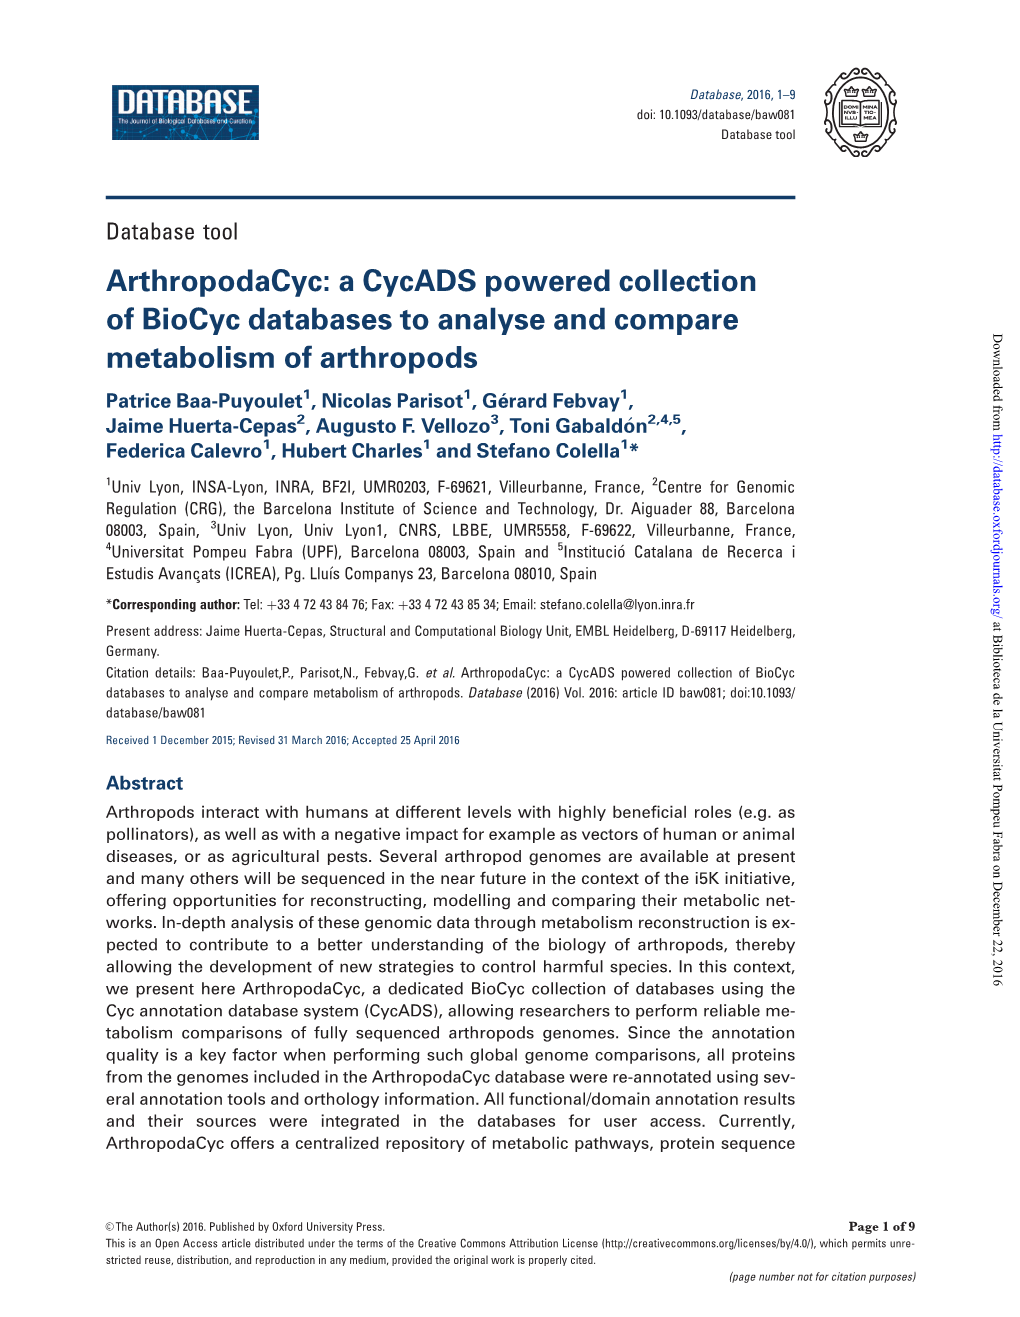 A Cycads Powered Collection of Biocyc Databases to Analyse and Compare Metabolism of Arthropods